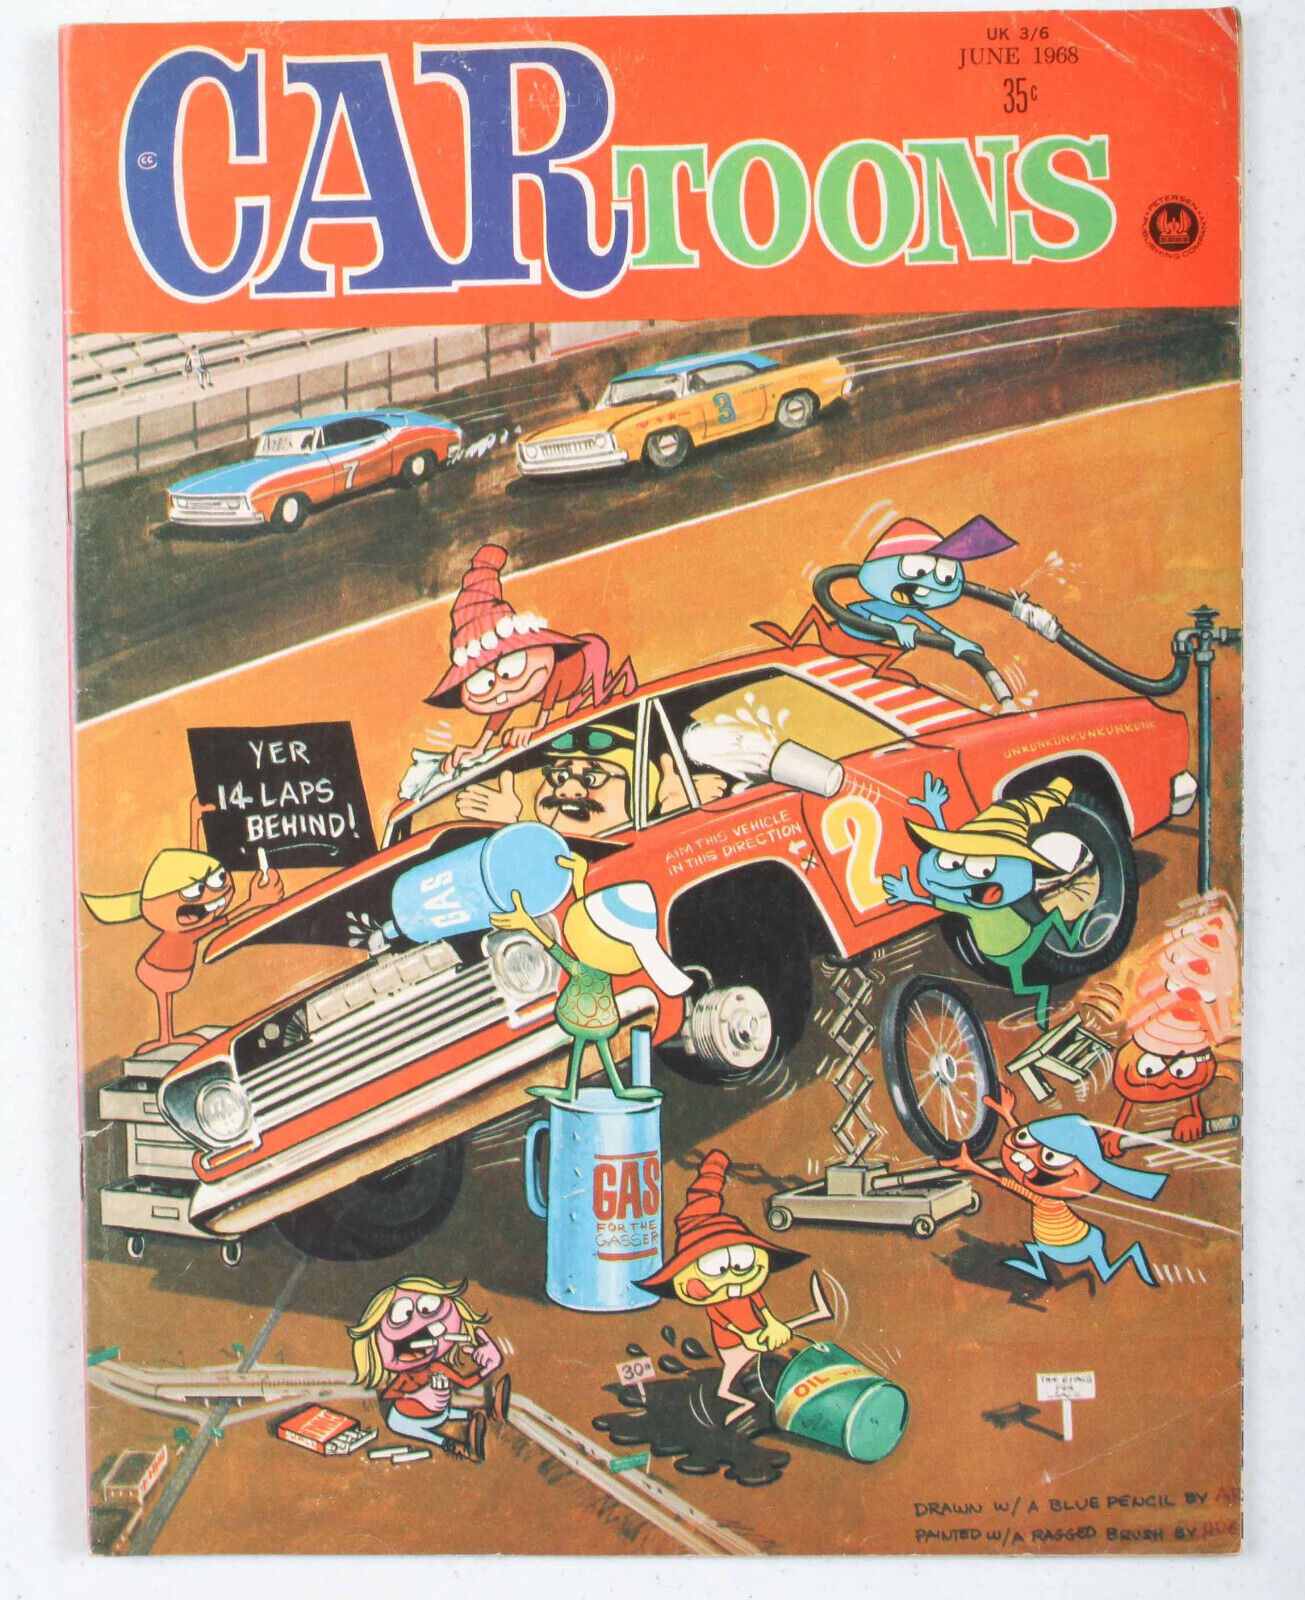 Vintage 1968 June #41 CARTOONS Racing Comic Book Complete 52 Pages